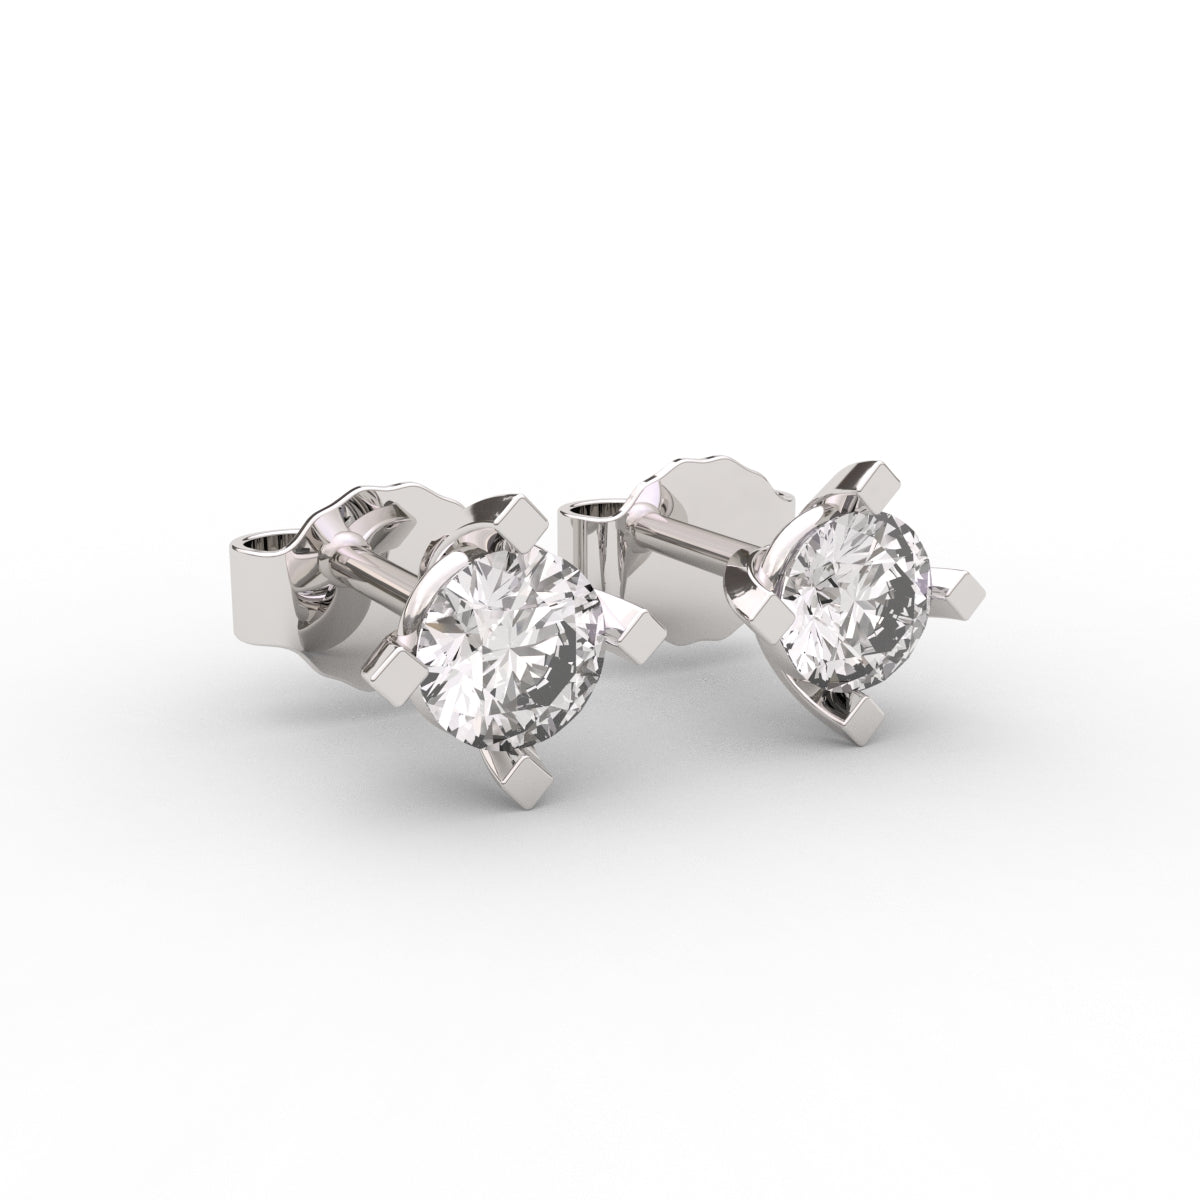 Shimmering solitaire diamond stud